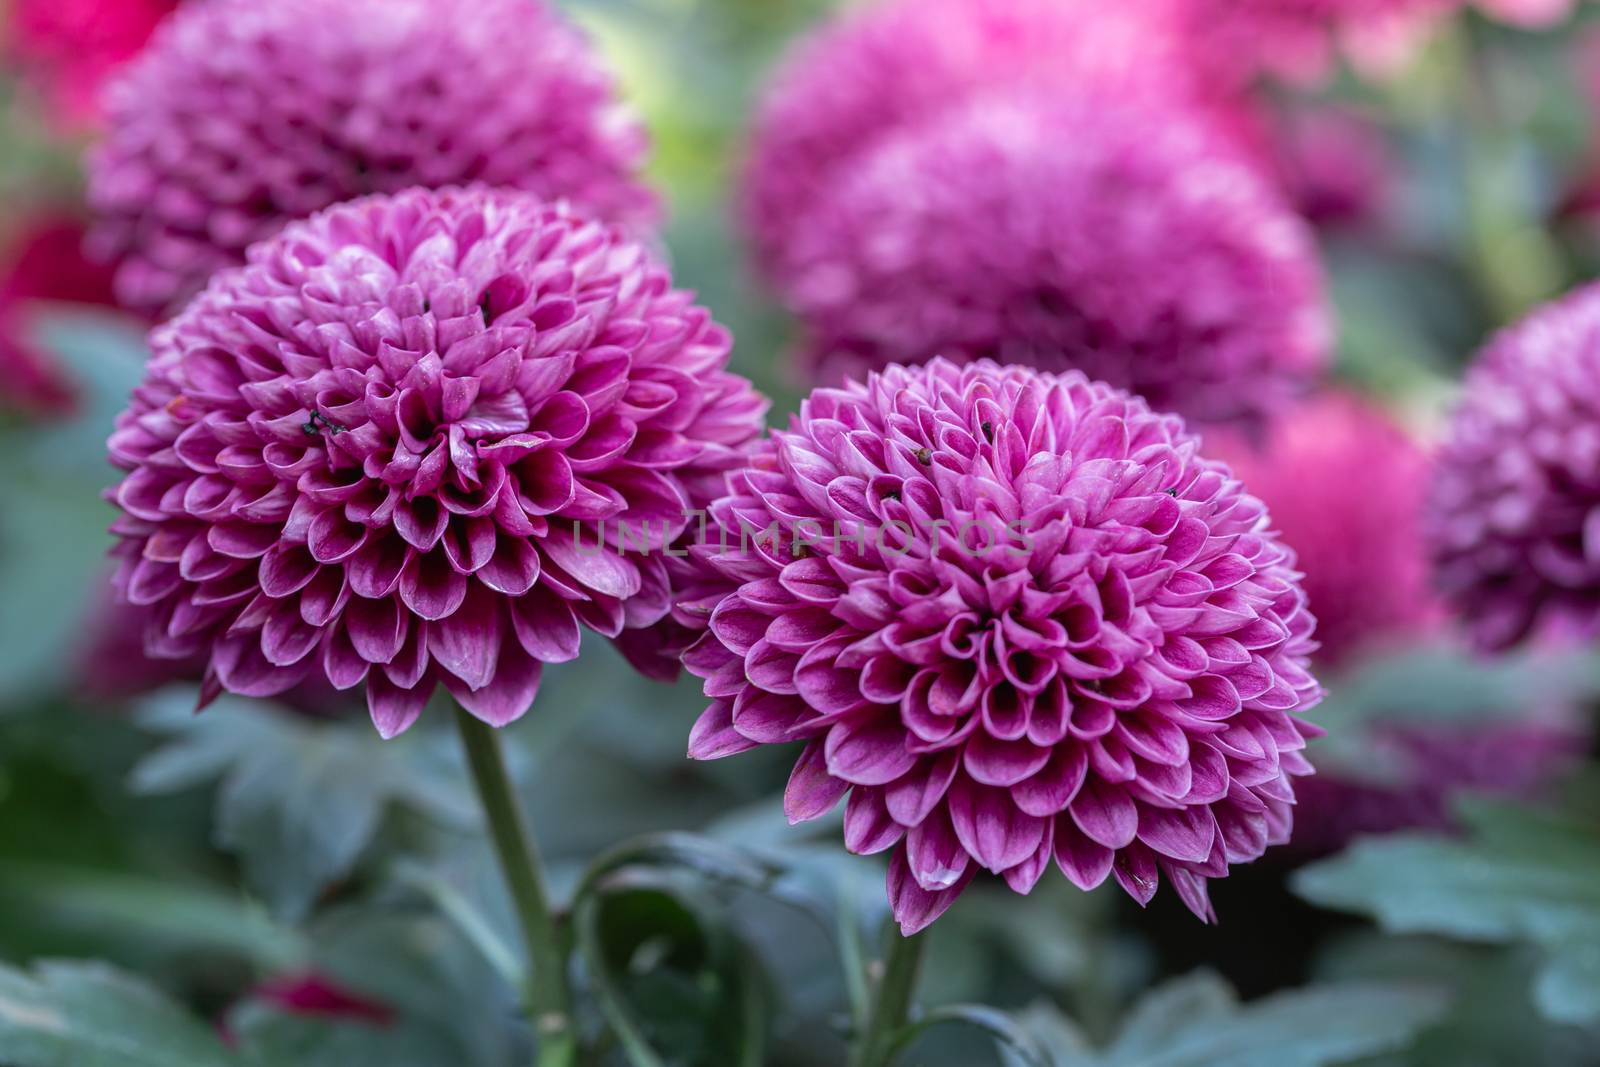 Pompom chrysanthemums flower in garden at sunny summer or spring day by phanthit